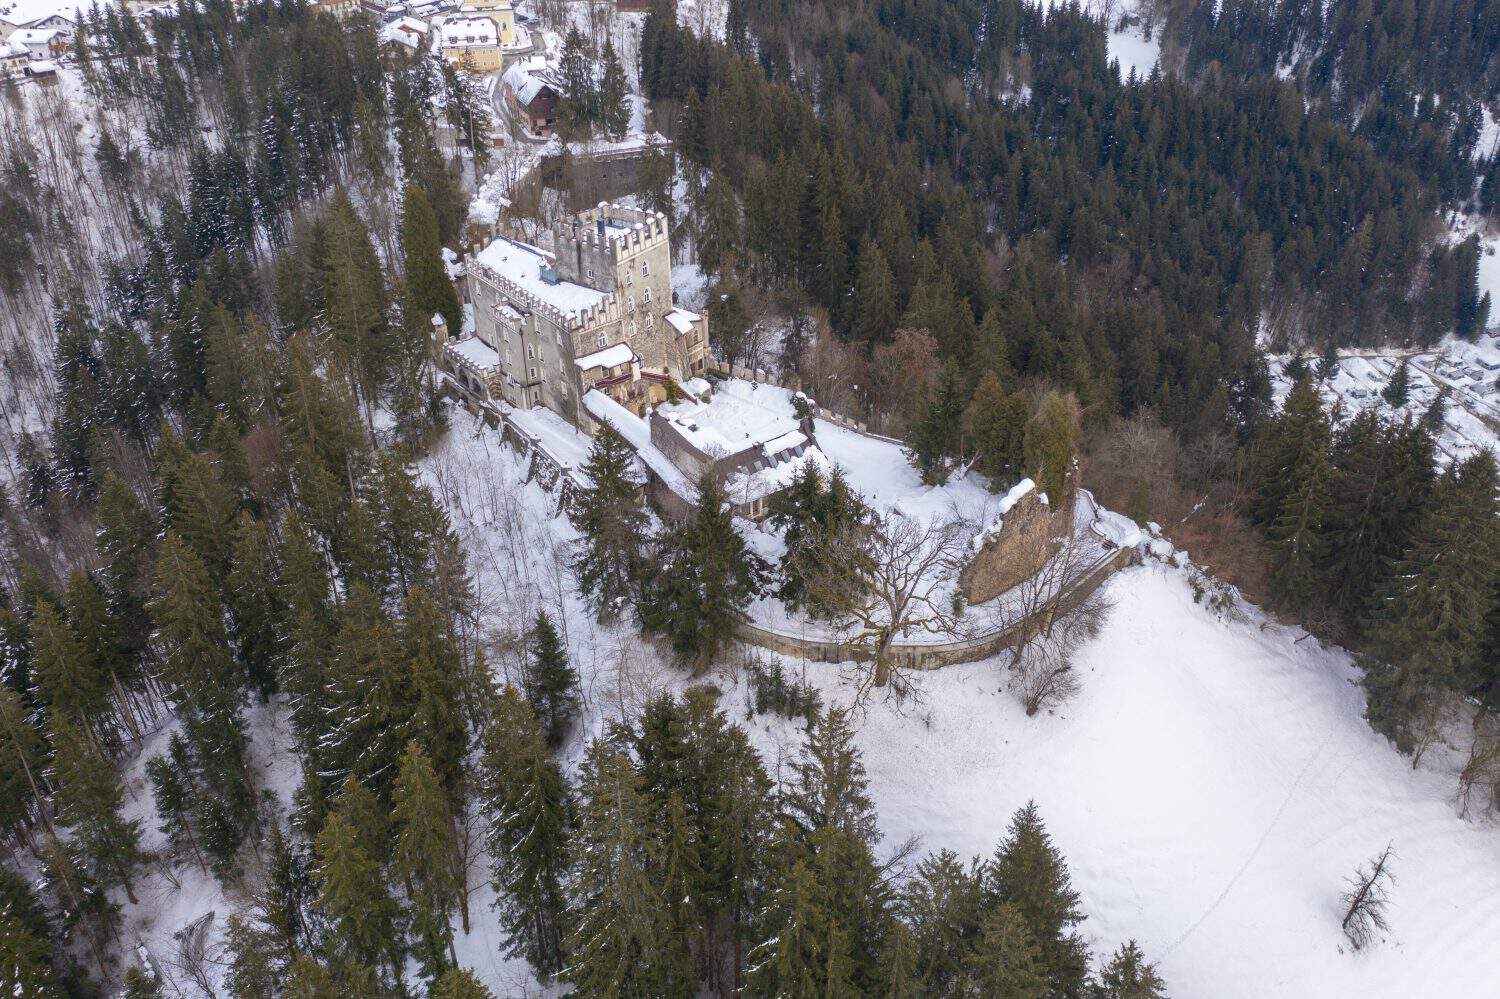 The snow covered castle of Itter, Austria in the winter season.